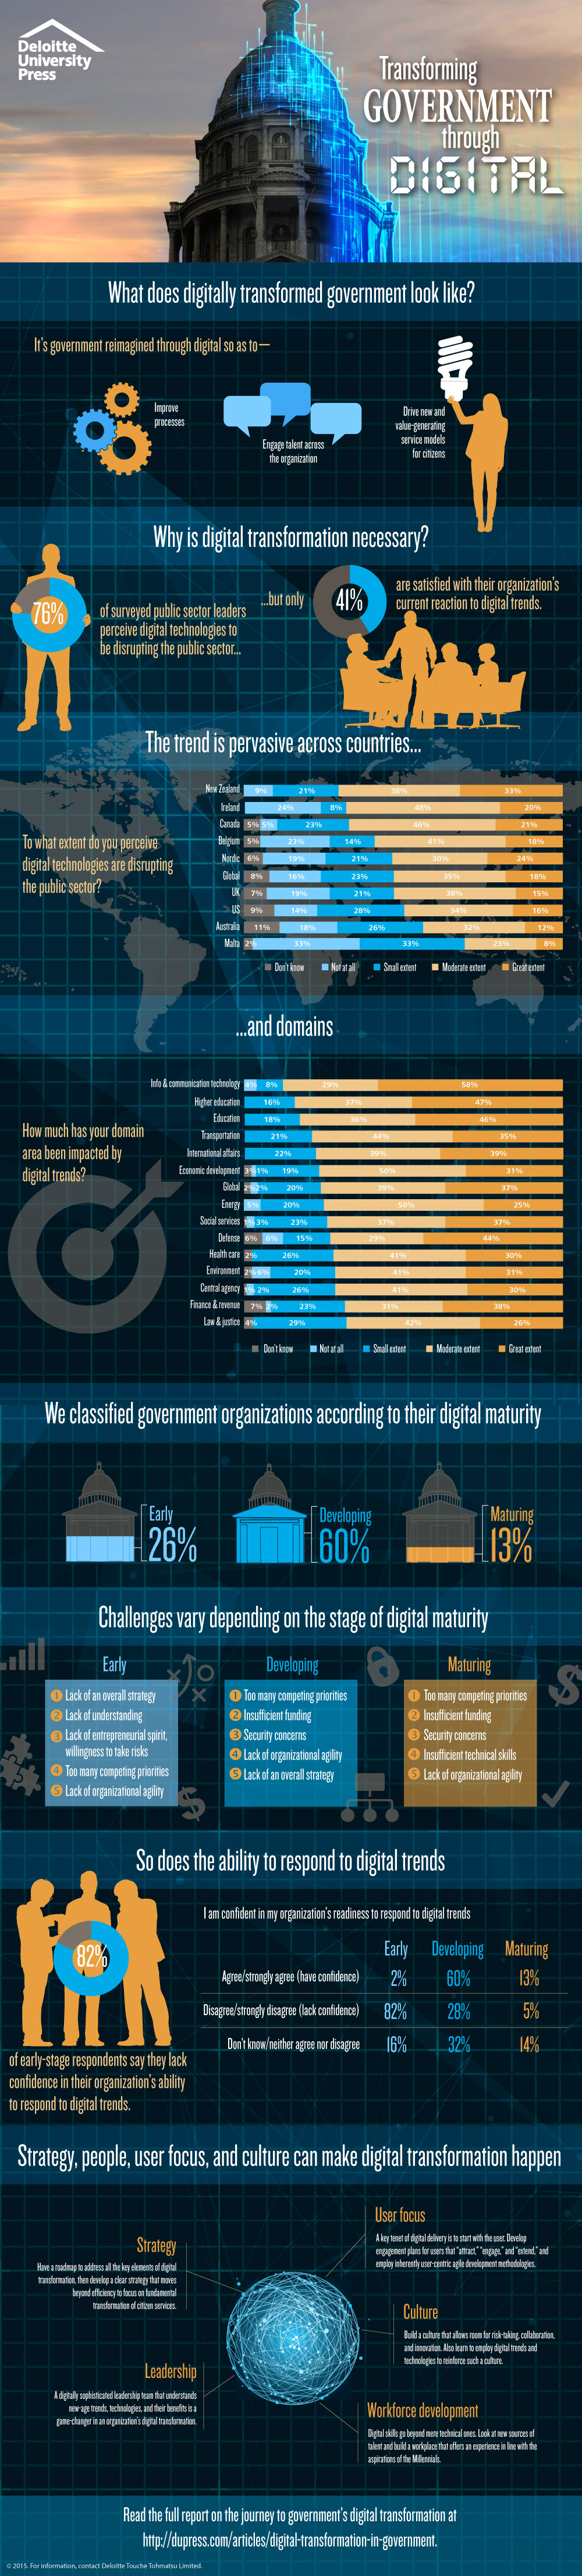 Why & How Government Agencies are Digitally Transforming